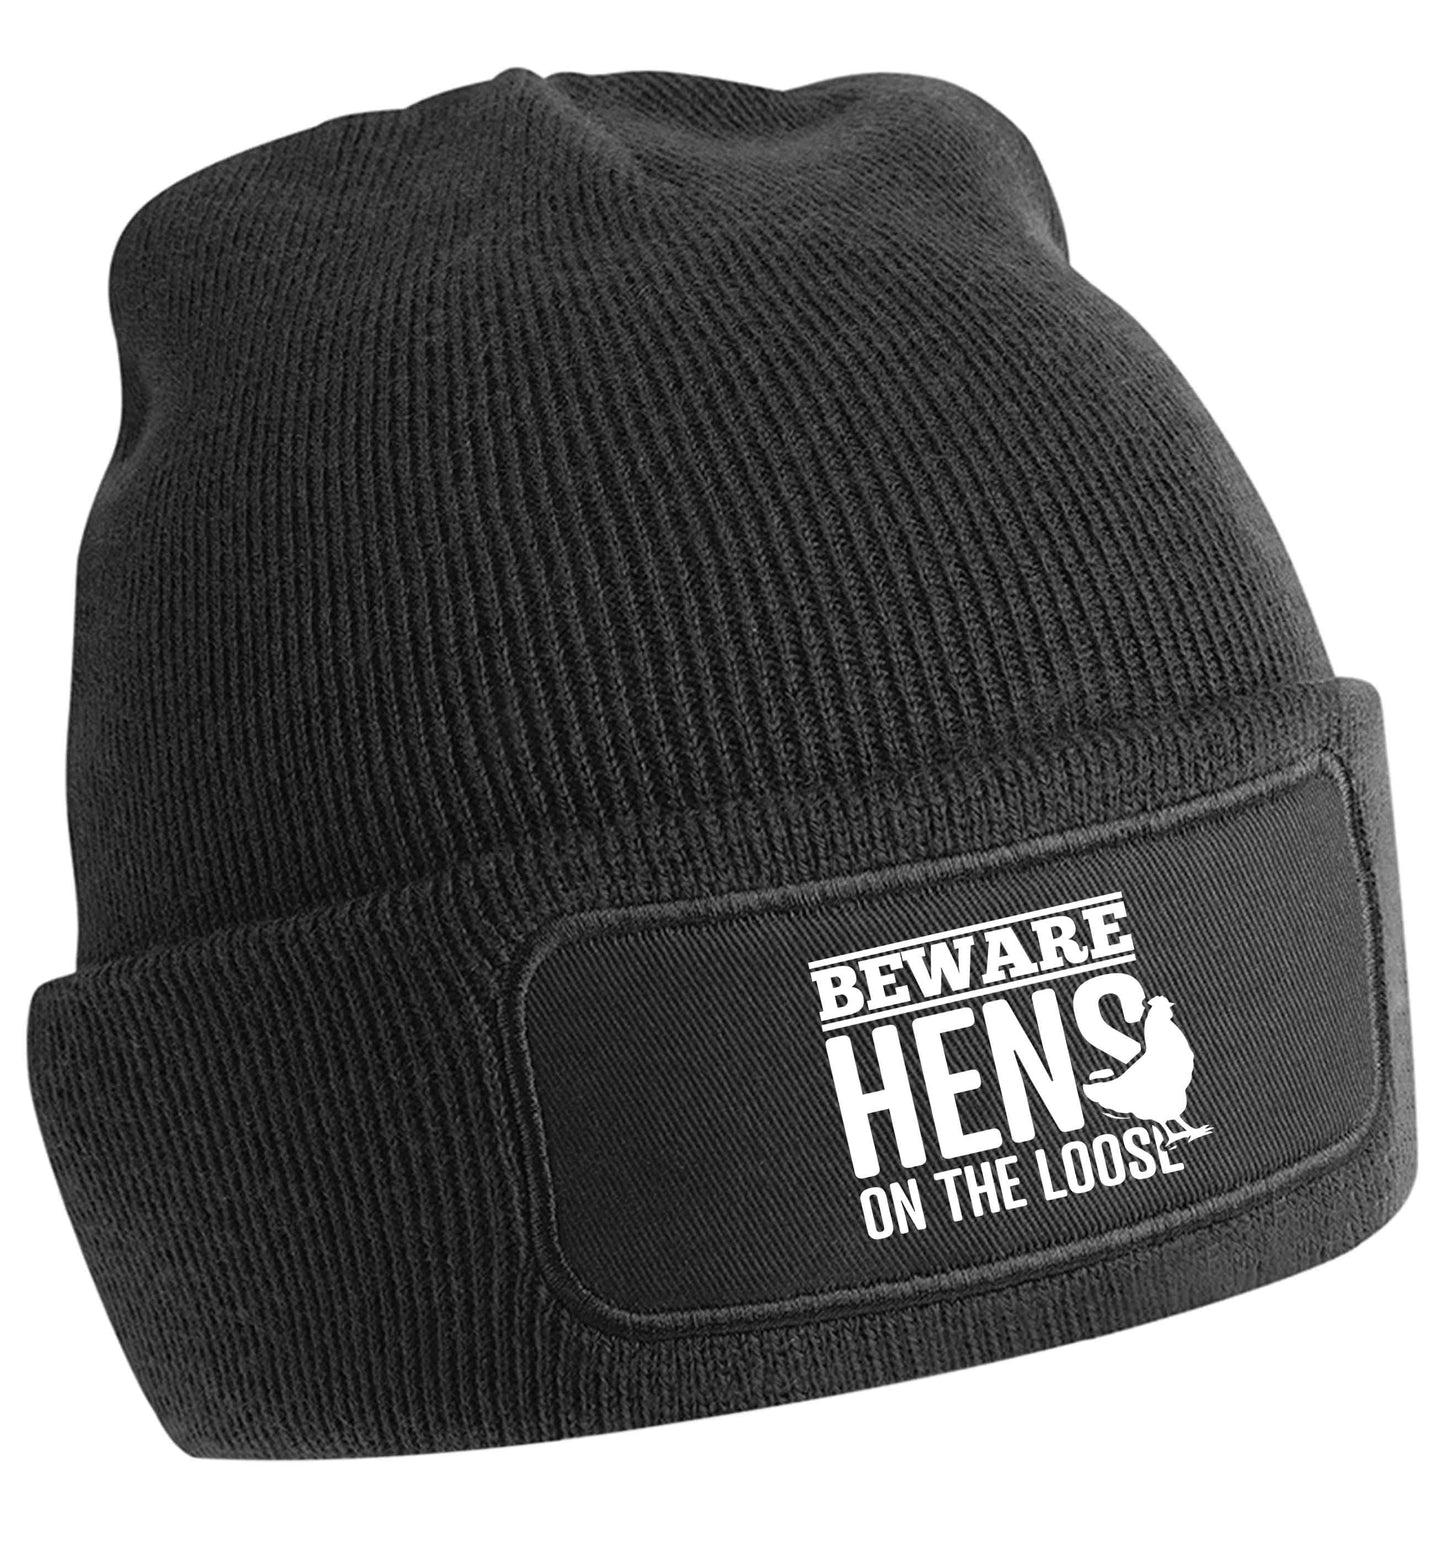 Beware hens on the loose | Beanie hat